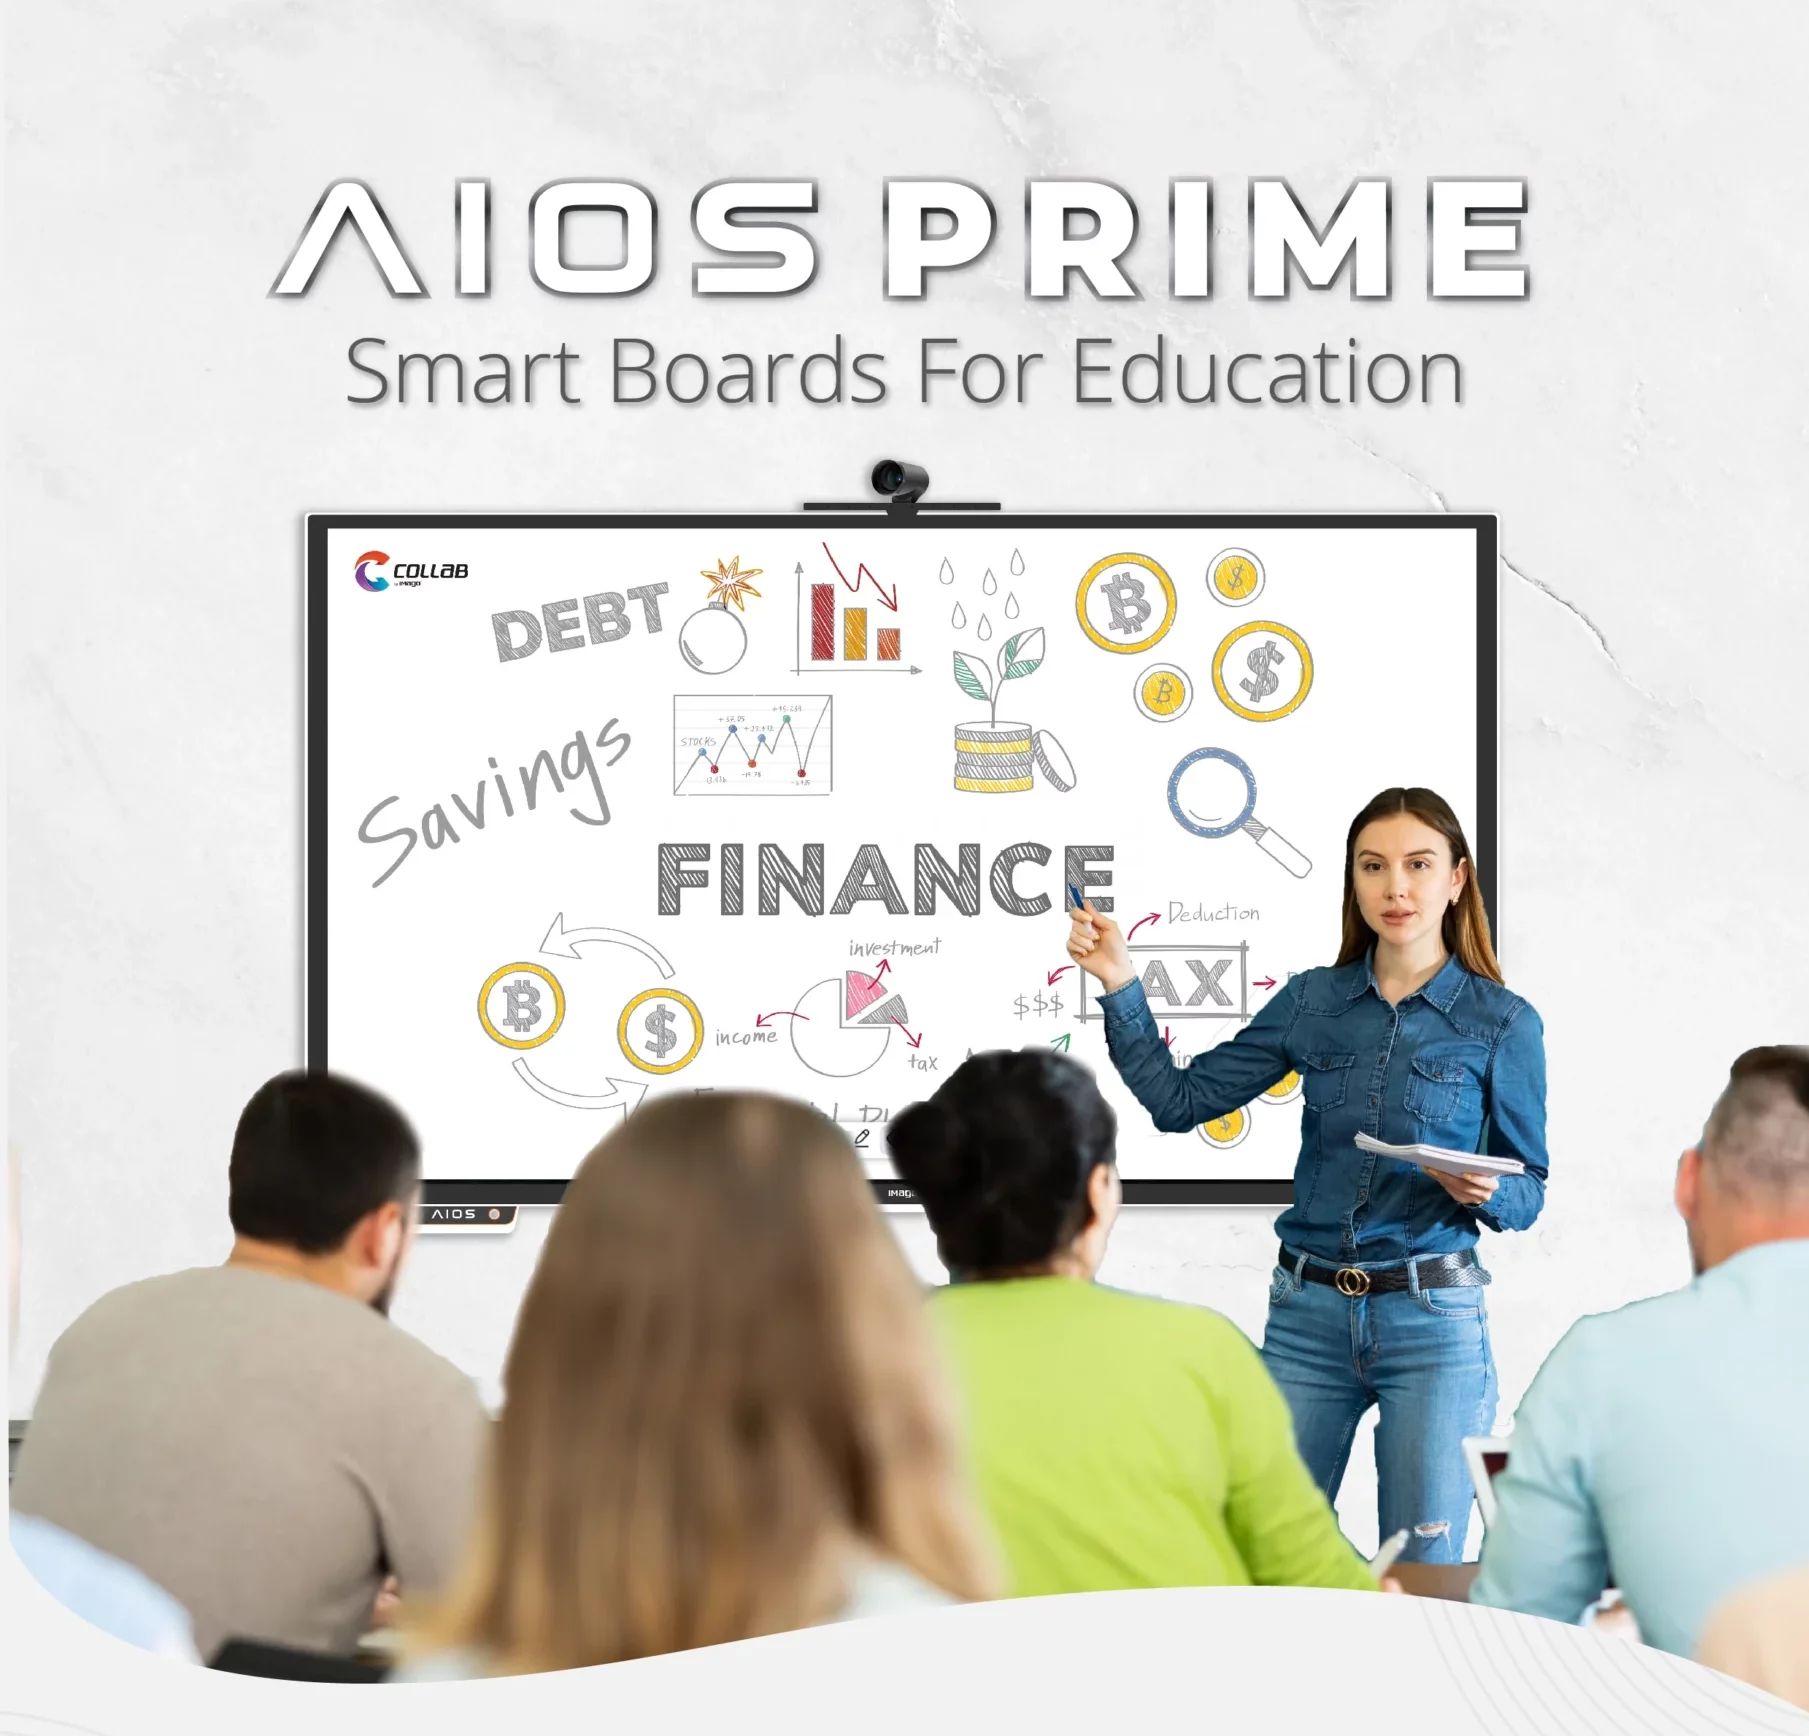 AIOS-PRIME-Smart-Boards-for-Education-01